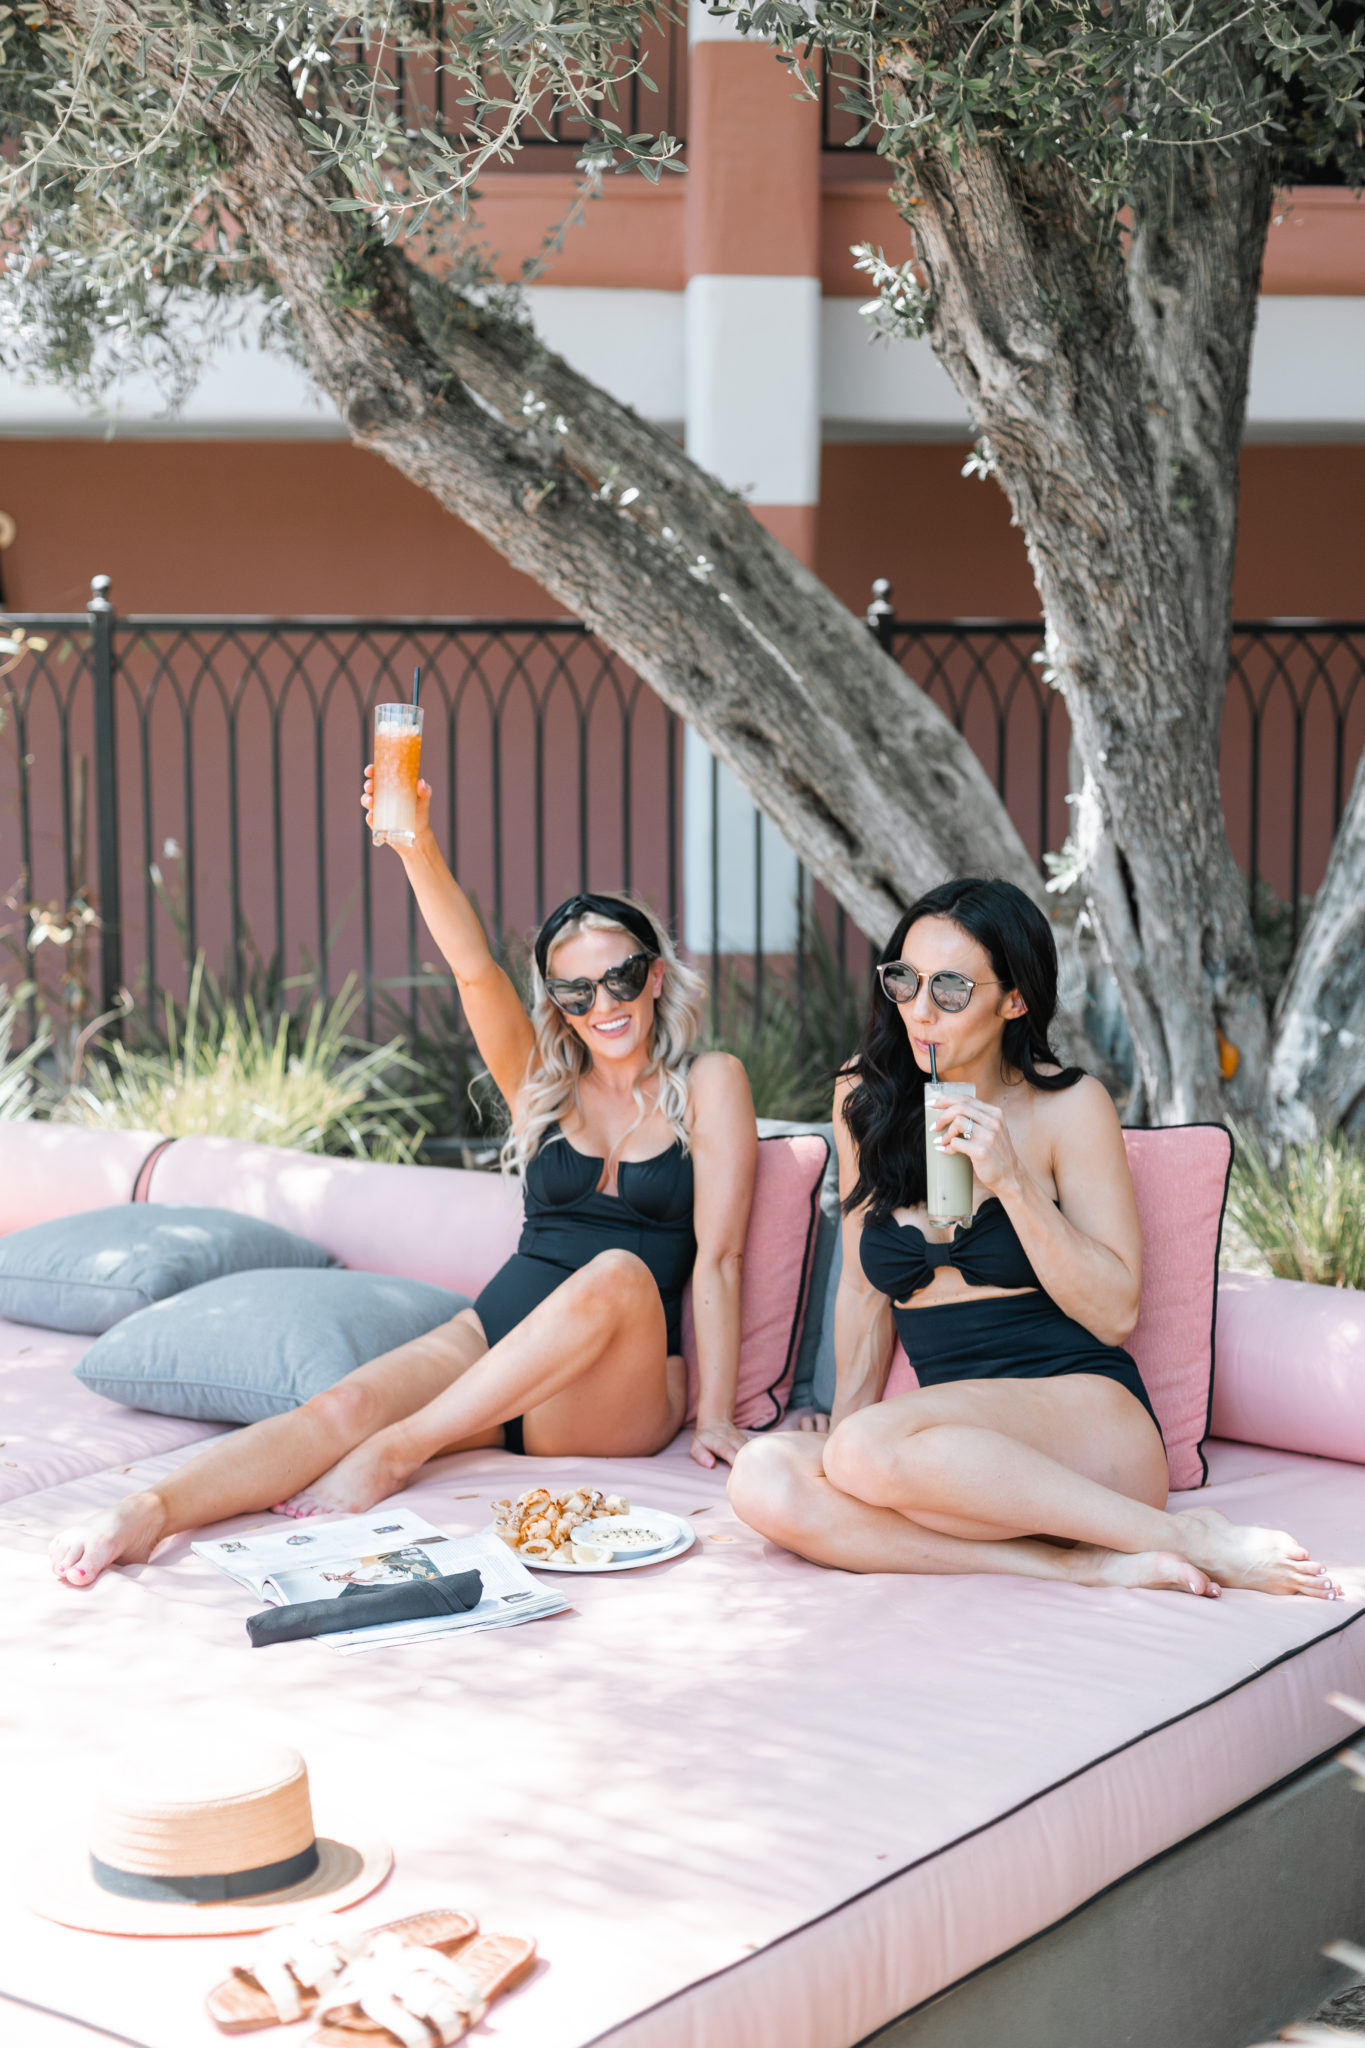 Shopbop Swimsuits roundup featured by top US fashion blog, Outfits and Outings: image of a woman wearing a black Marysia one piece swimsuit and Jimmy Choo aviator sunglasses